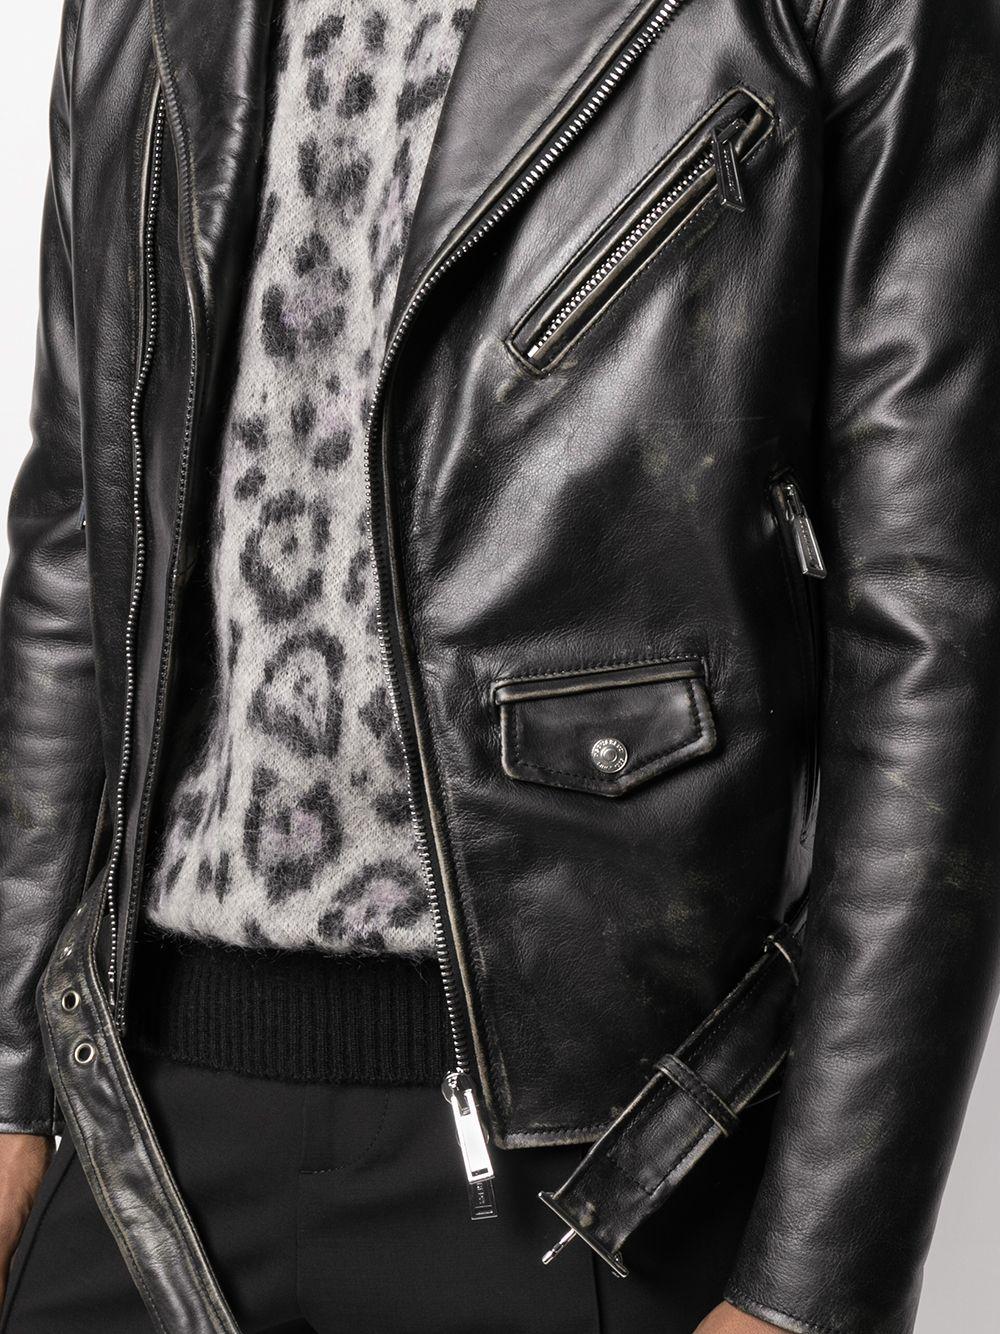 DSquared² X Ibrahimović Icon Leather Jacket in Black for Men | Lyst